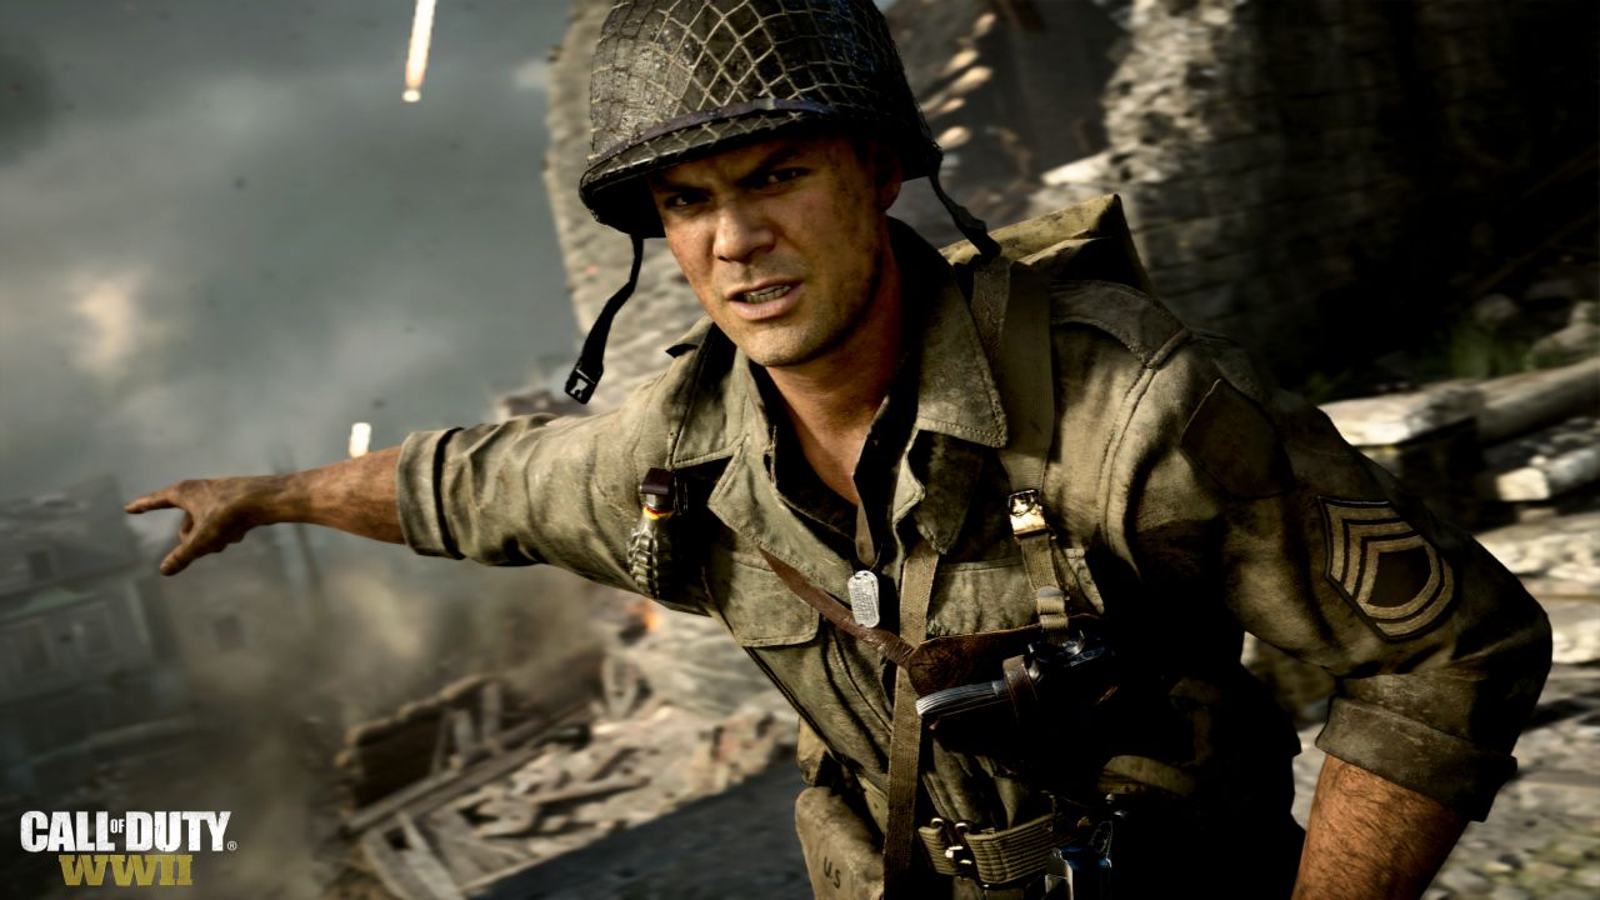 Preordering Call of Duty: WWII instantly unlocks the multiplayer